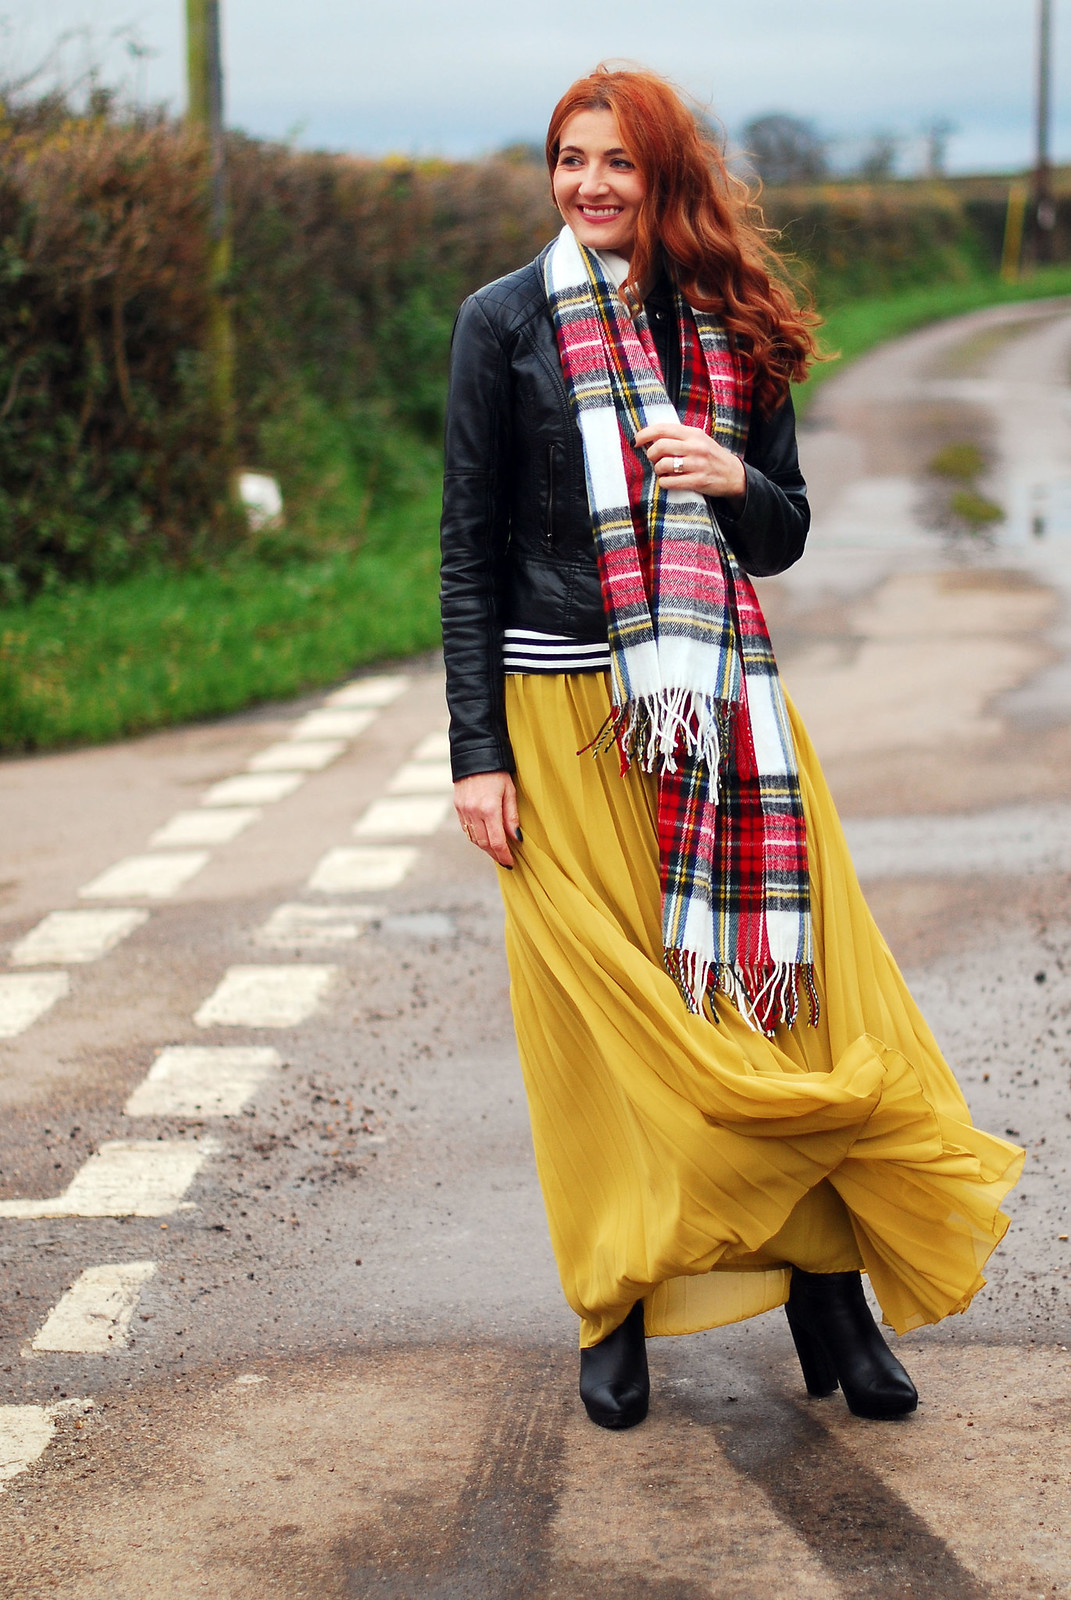 8 Ways to Wear Tartan / Checks / Plaid in Winter | Not Dressed As Lamb, over 40 fashion